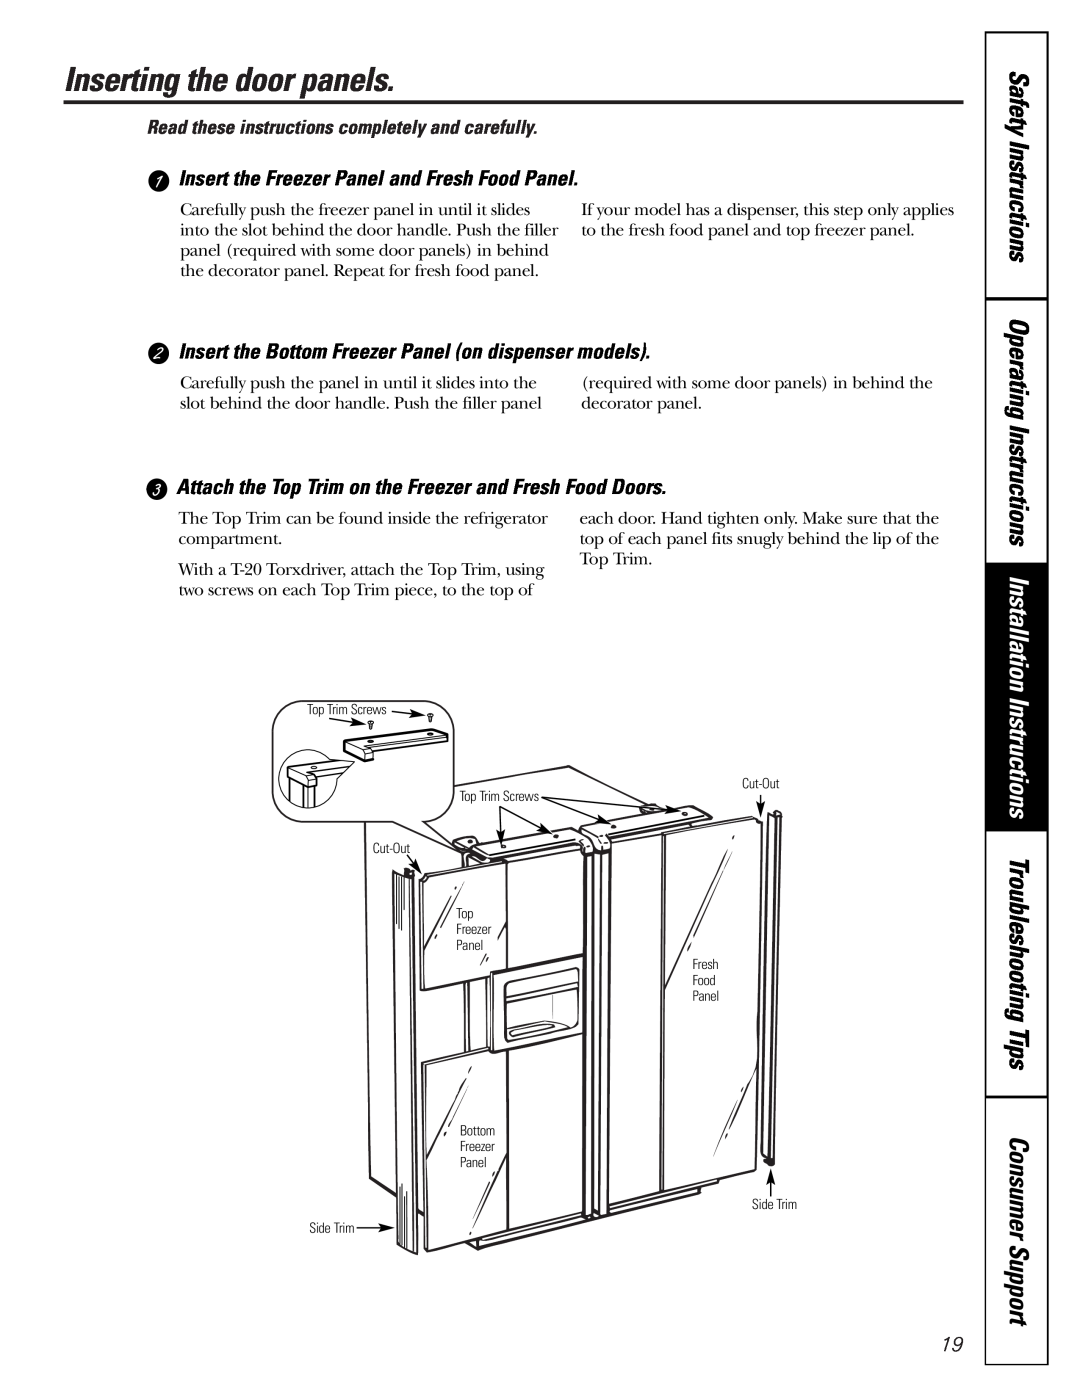 GE 200D2600P015 installation instructions Inserting the door panels, Insert the Freezer Panel and Fresh Food Panel 